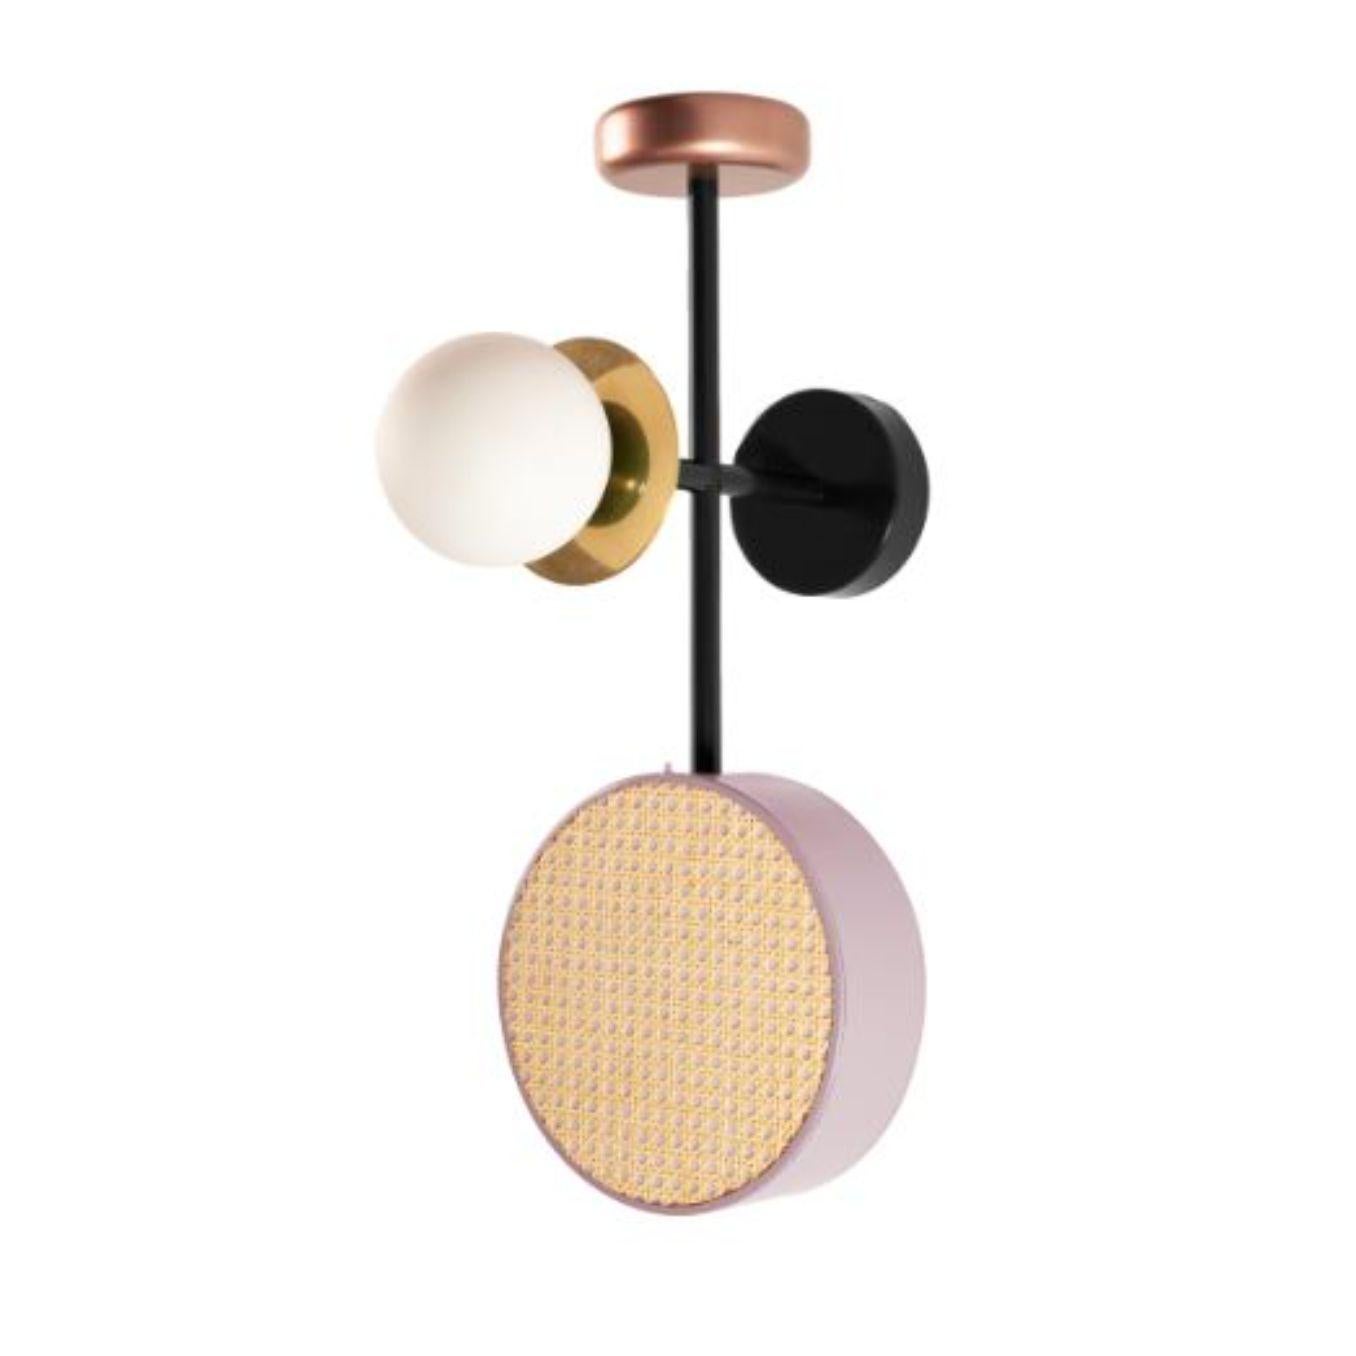 Monaco wall lamp by Dooq
Dimensions: W 45 x D 27.5 x H 70 cm
Materials: lacquered metal, brass/nickel, rattan and wood spheres.

Information:
230V/50Hz
3 x max. G9
4W LED

120V/60Hz
3 x max. G9
4W LED

Cable: 59”/1,5m

All our lamps